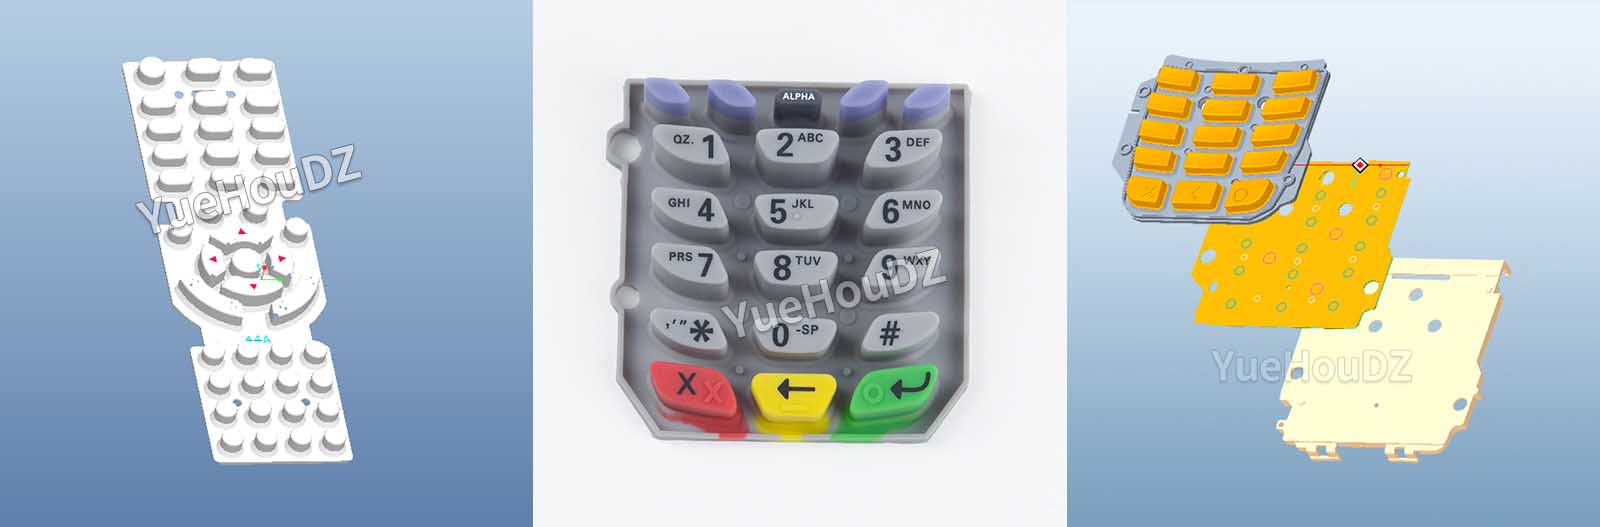 Custom-silicone-keypads-What-information-needs-to-be-provided.jpg